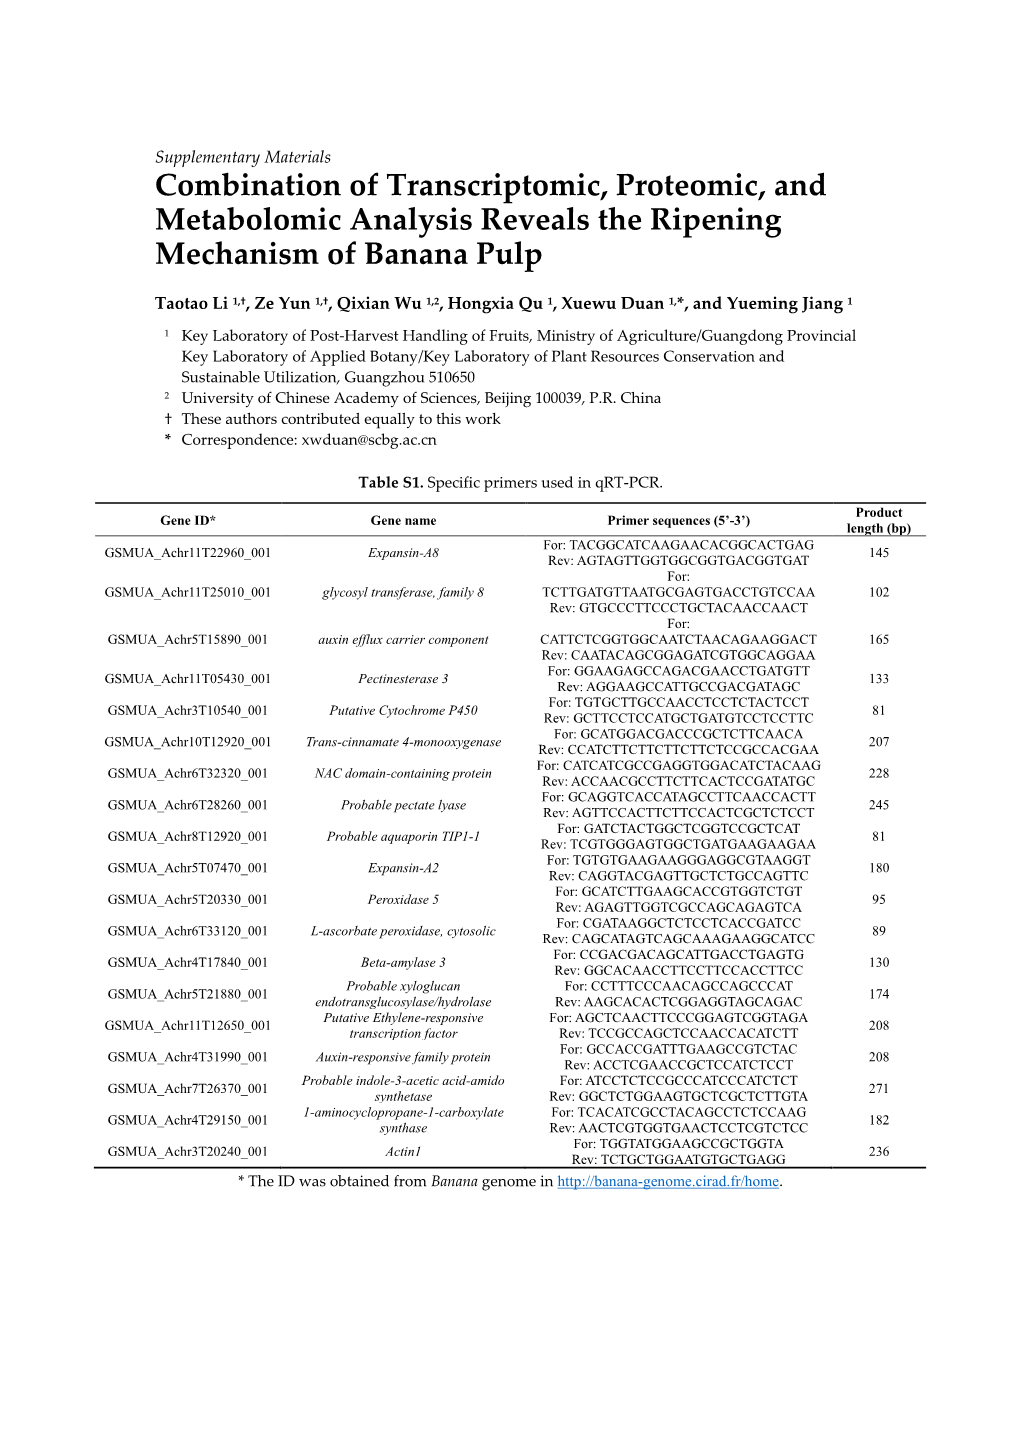 Combination of Transcriptomic, Proteomic, and Metabolomic Analysis Reveals the Ripening Mechanism of Banana Pulp